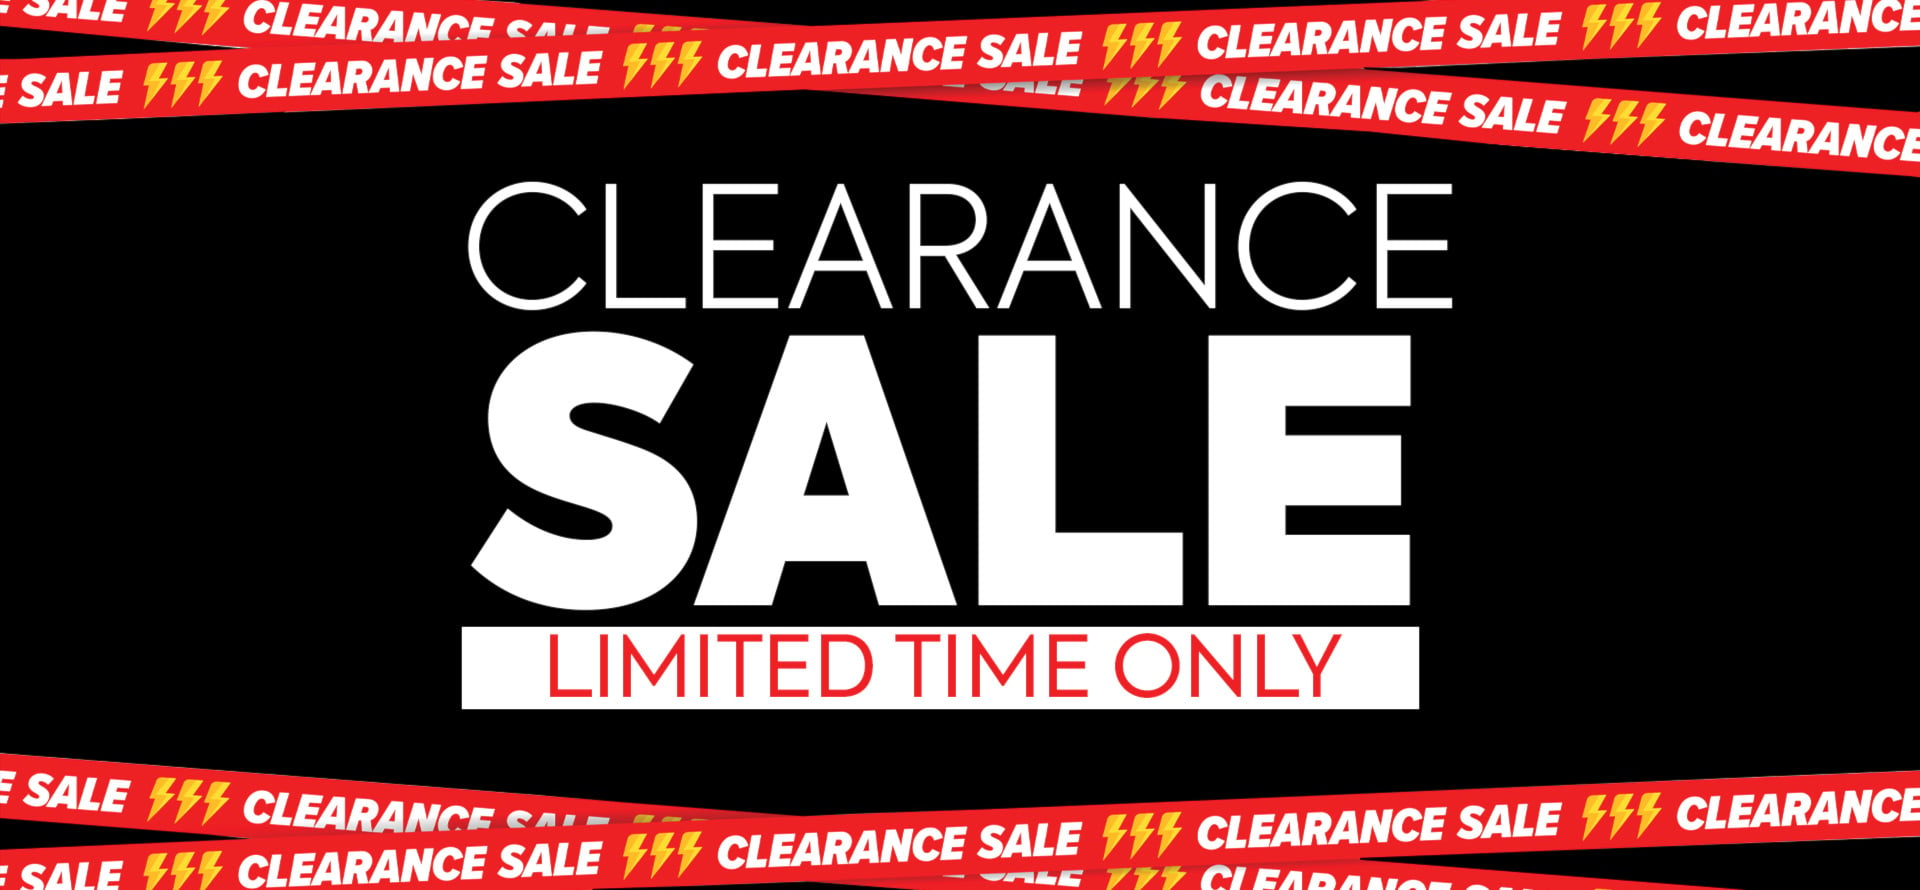 Save 10% on Clearance